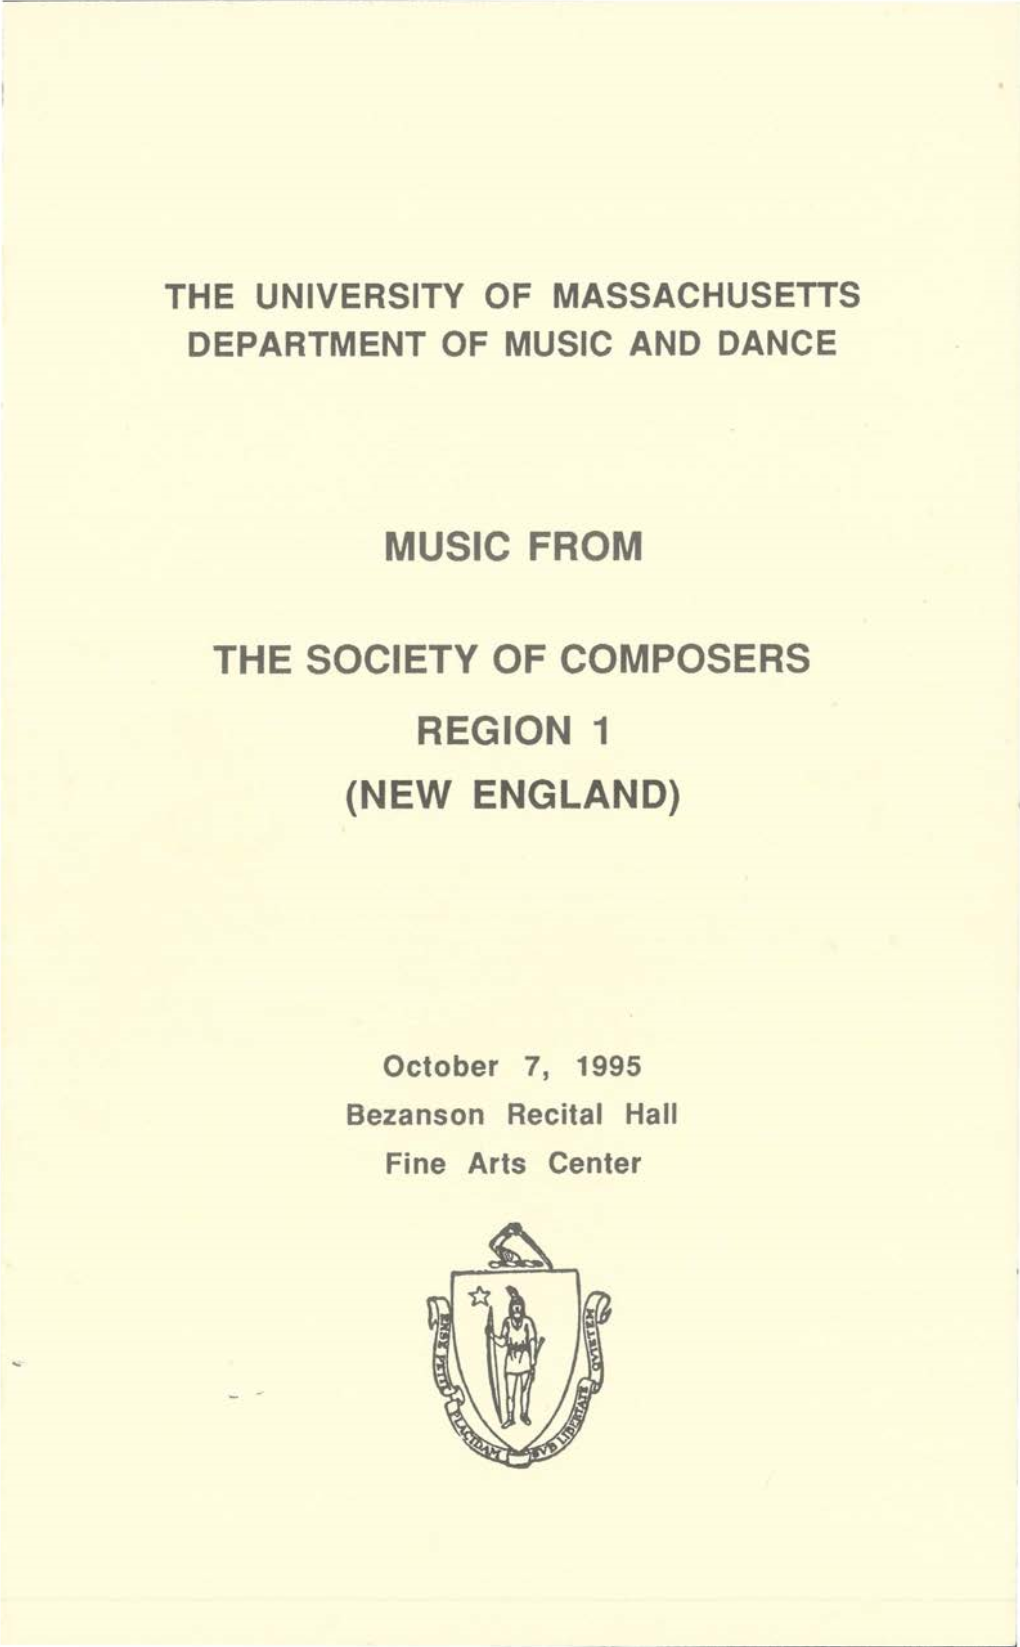 Music from the Society of Composers